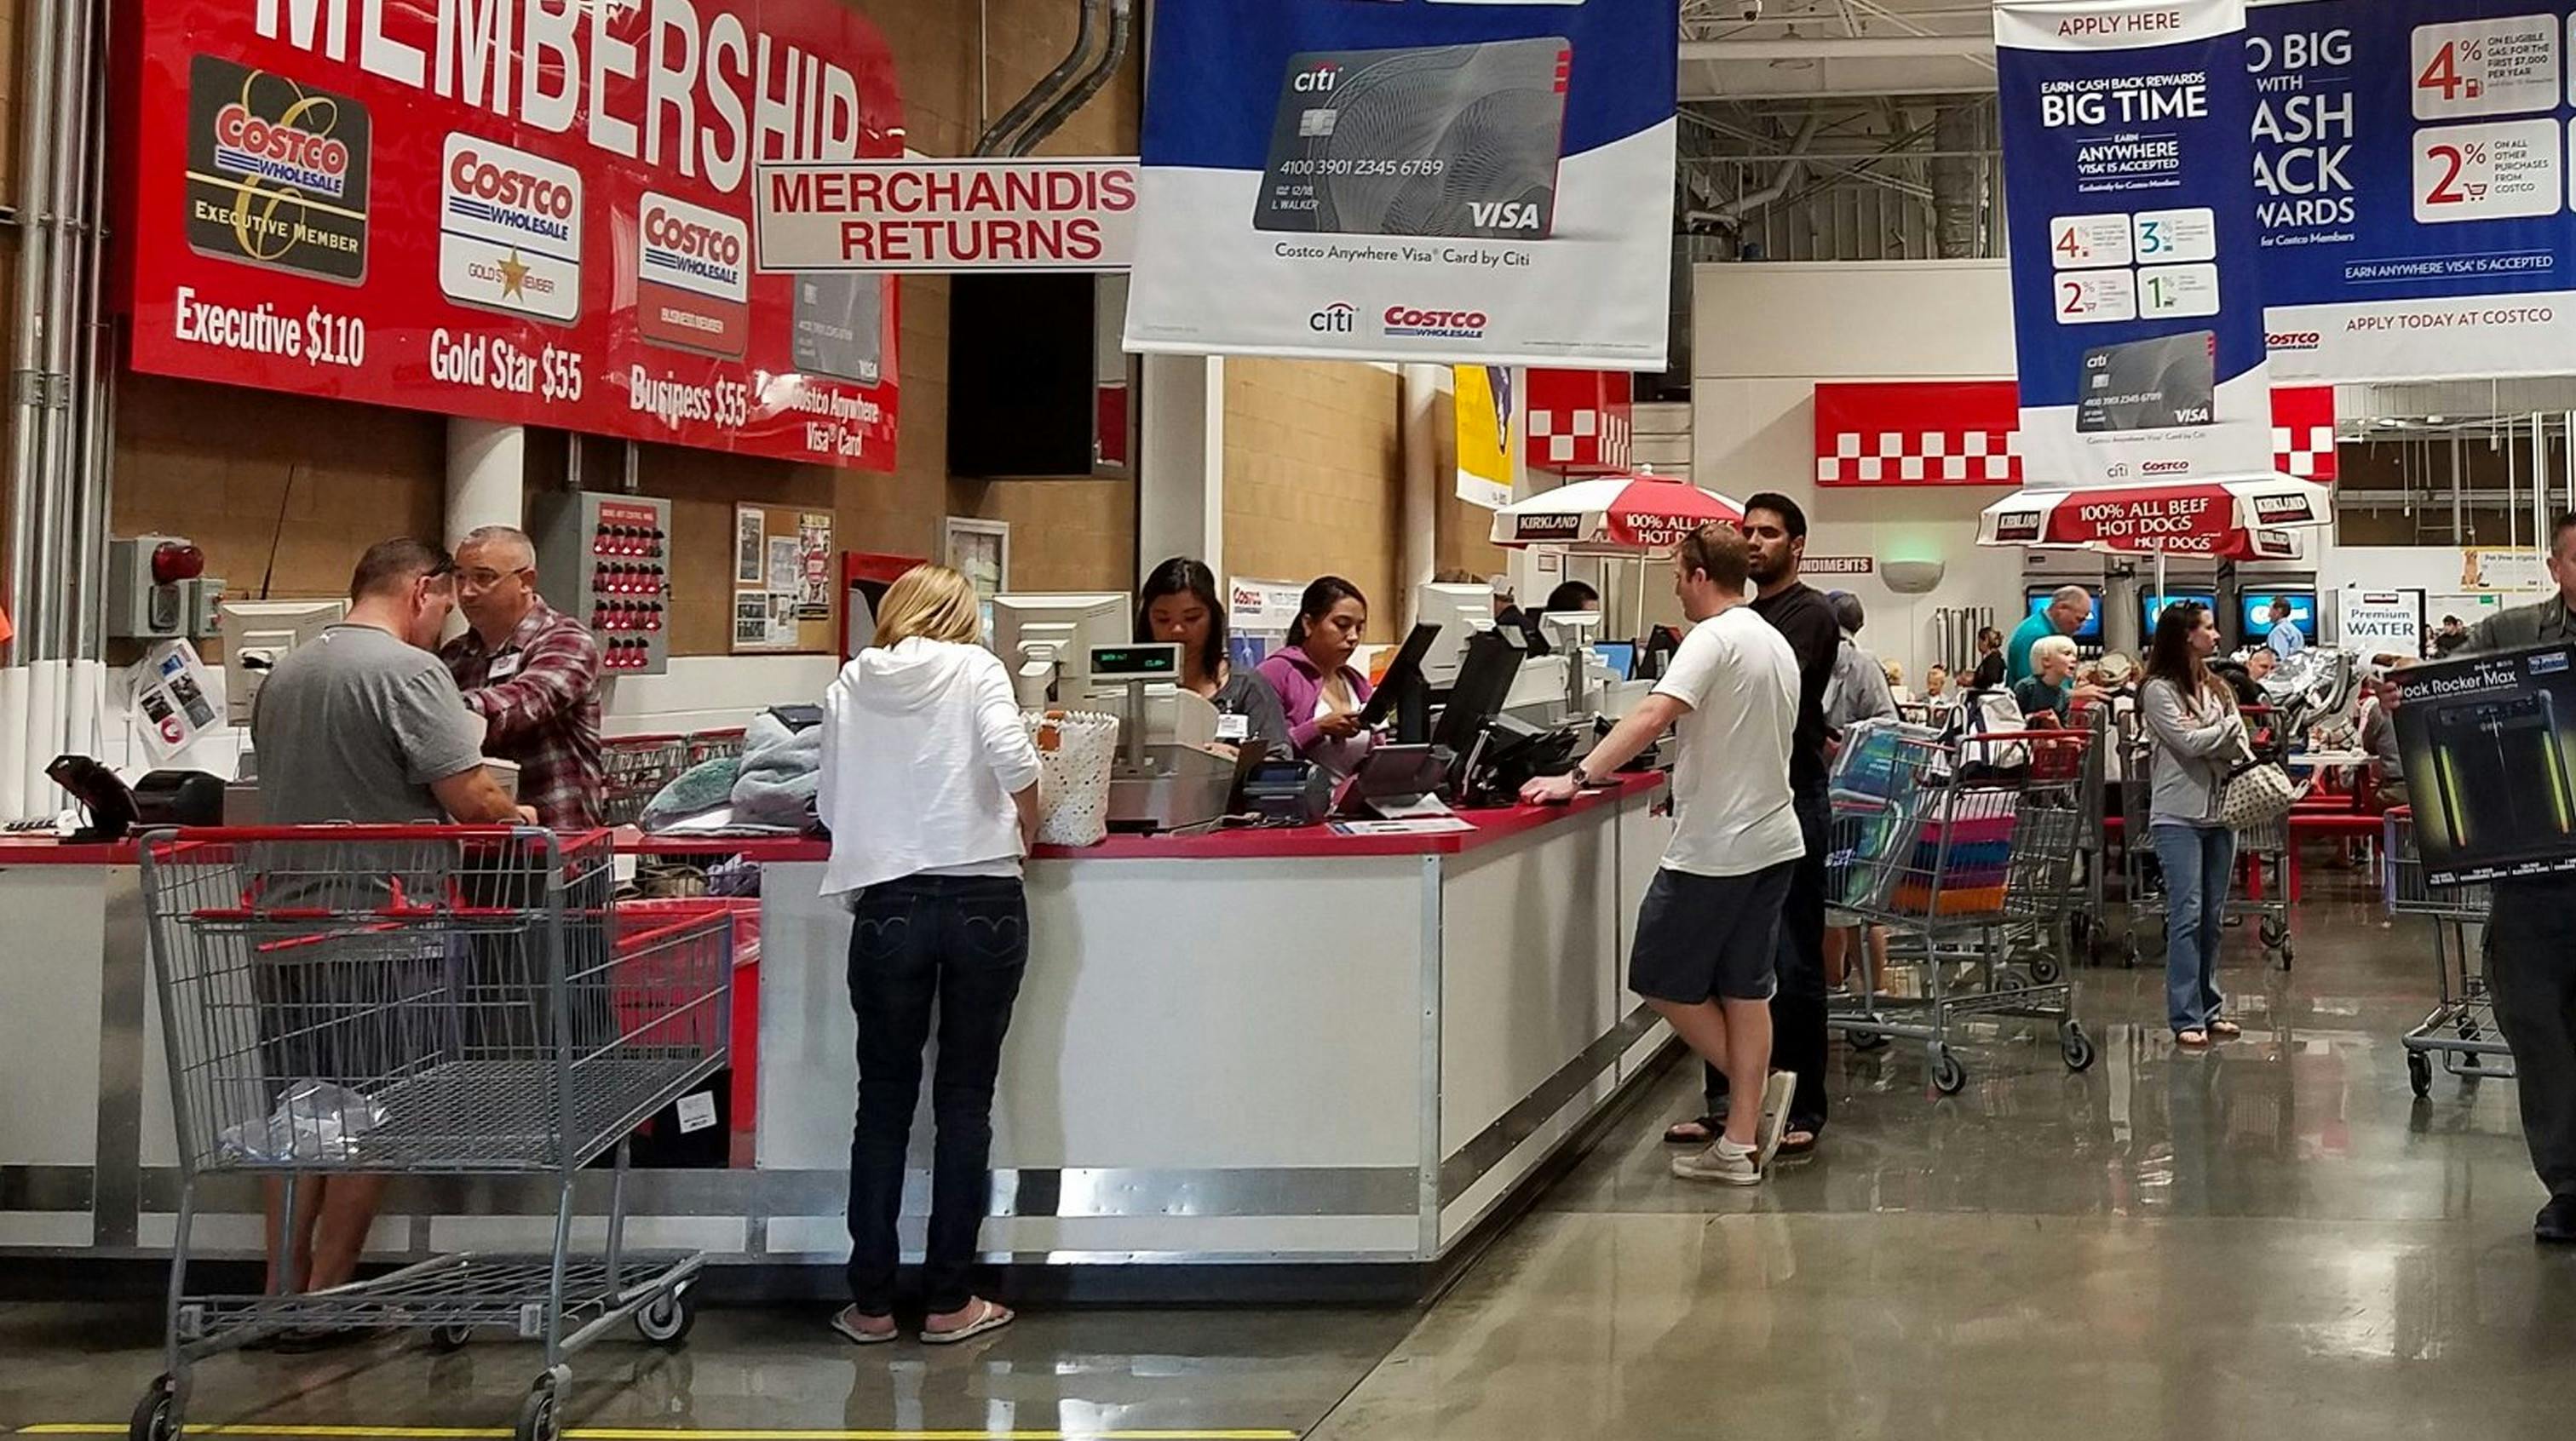 Costco Return Policy: Here's Exactly What You Can and Can't Do - The